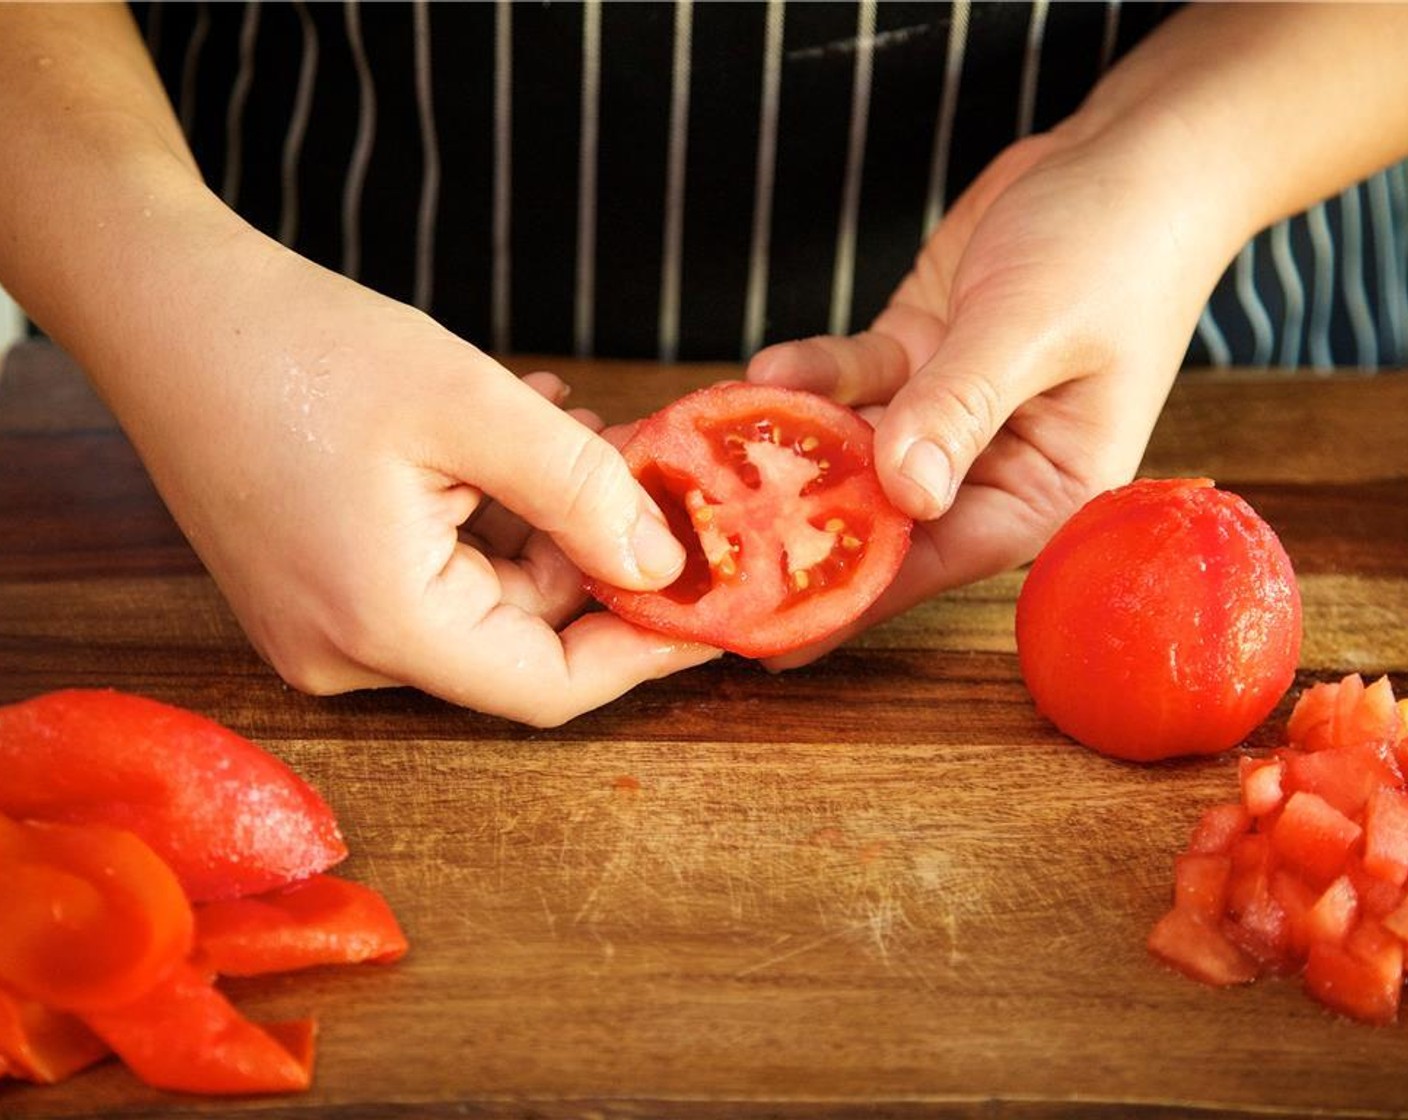 step 11 Lay the tomato halves flat on the cutting board and slice the halves across horizontally. Dice the tomatoes into quarter inch pieces and set aside.